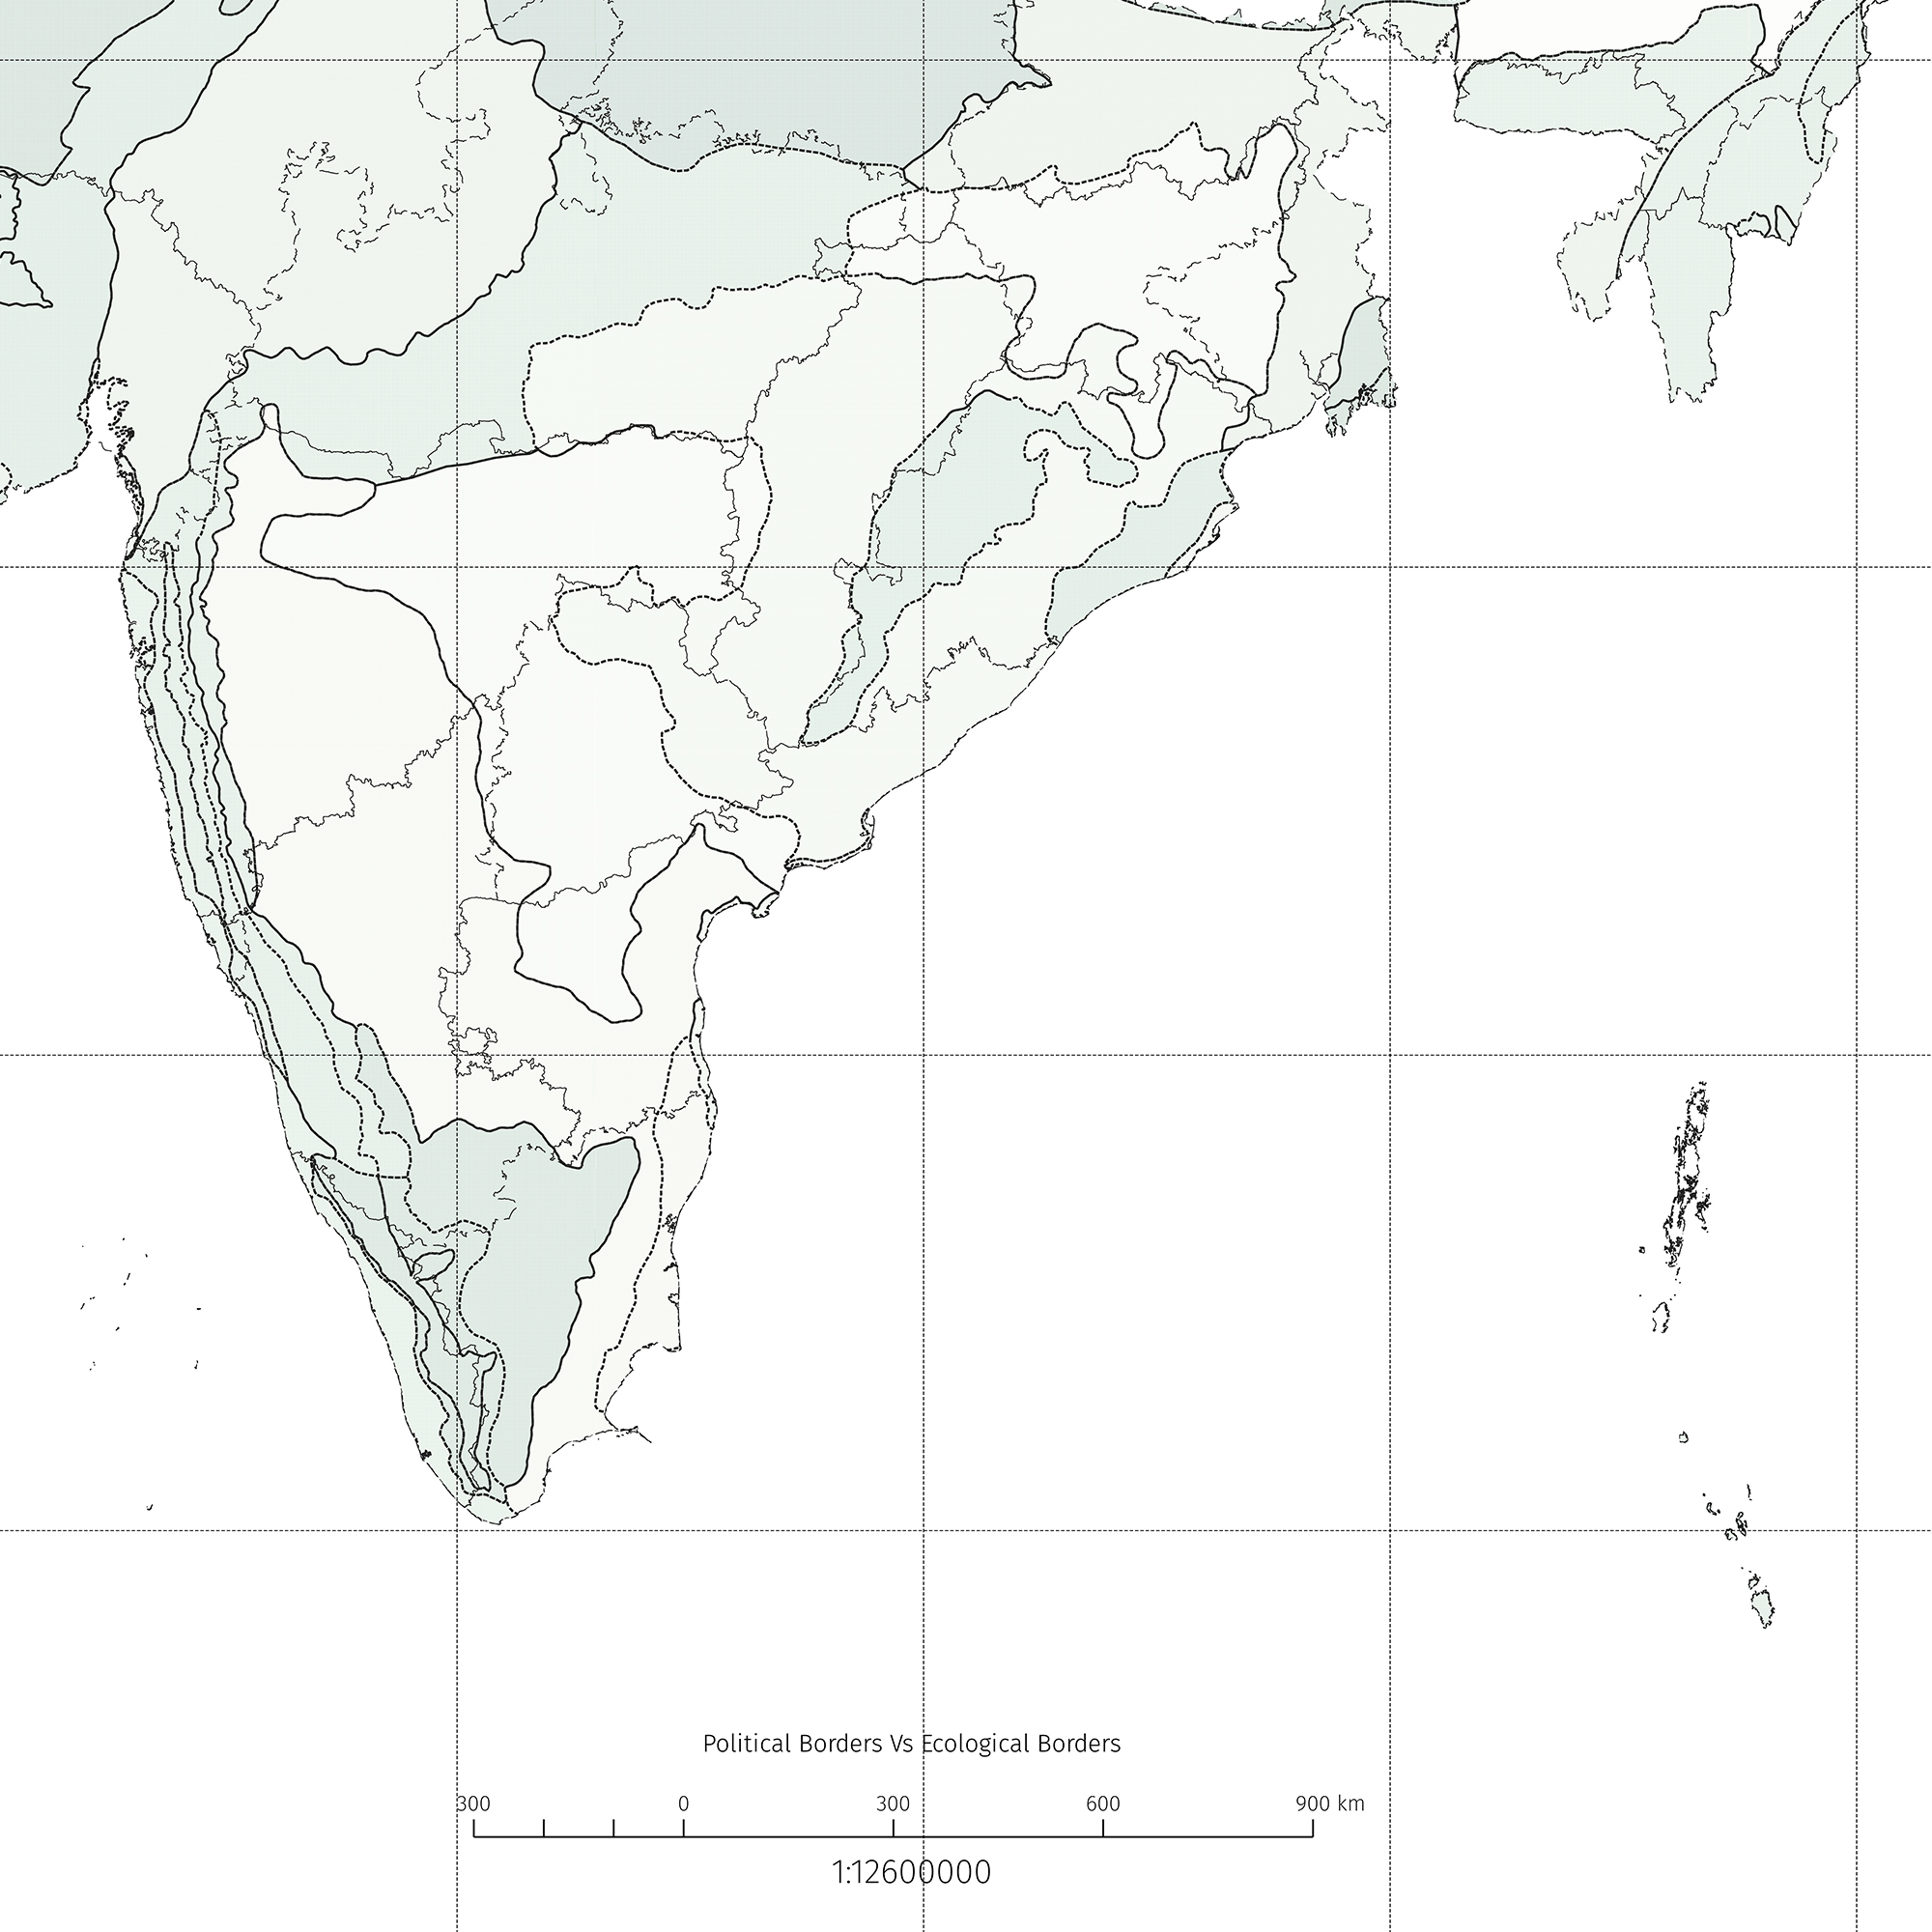 A speculative cartographic imagination of an India along ecoregions